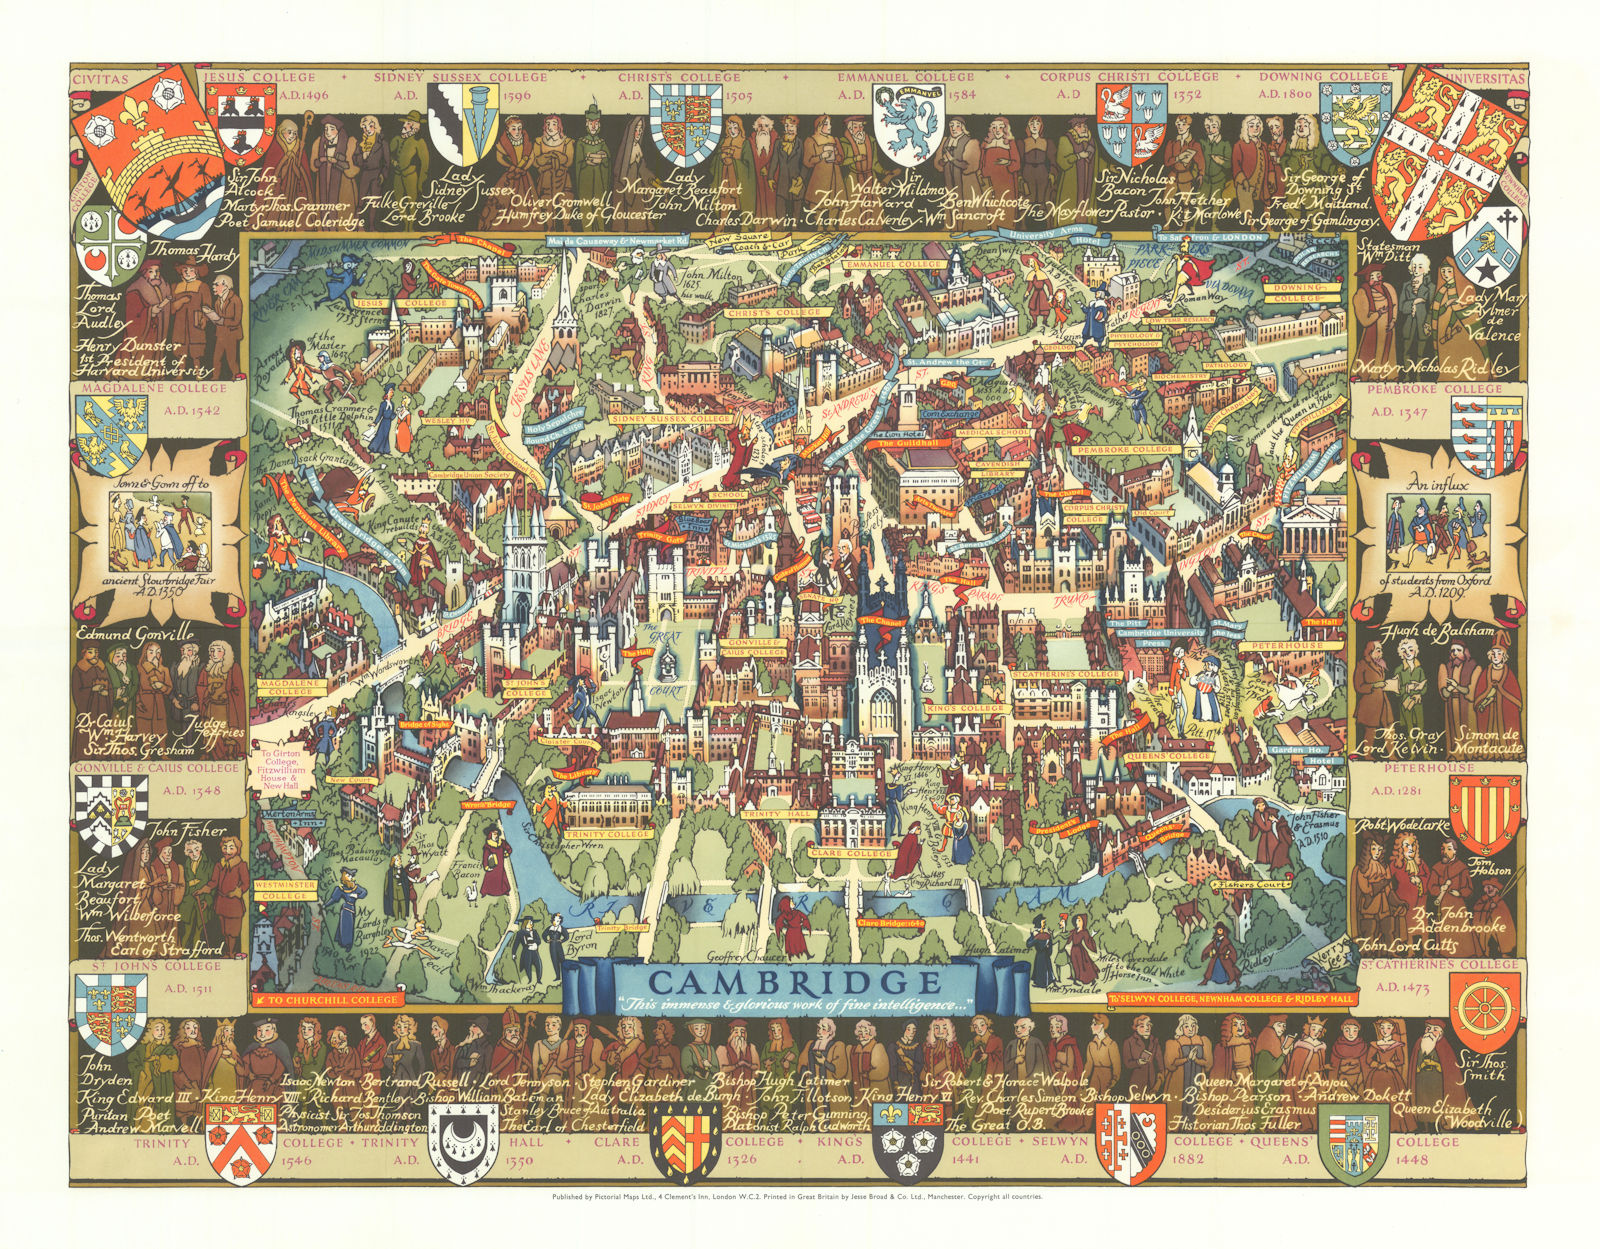 Cambridge "This immense & glorious work…" Kerry Lee folding pictorial map 1948